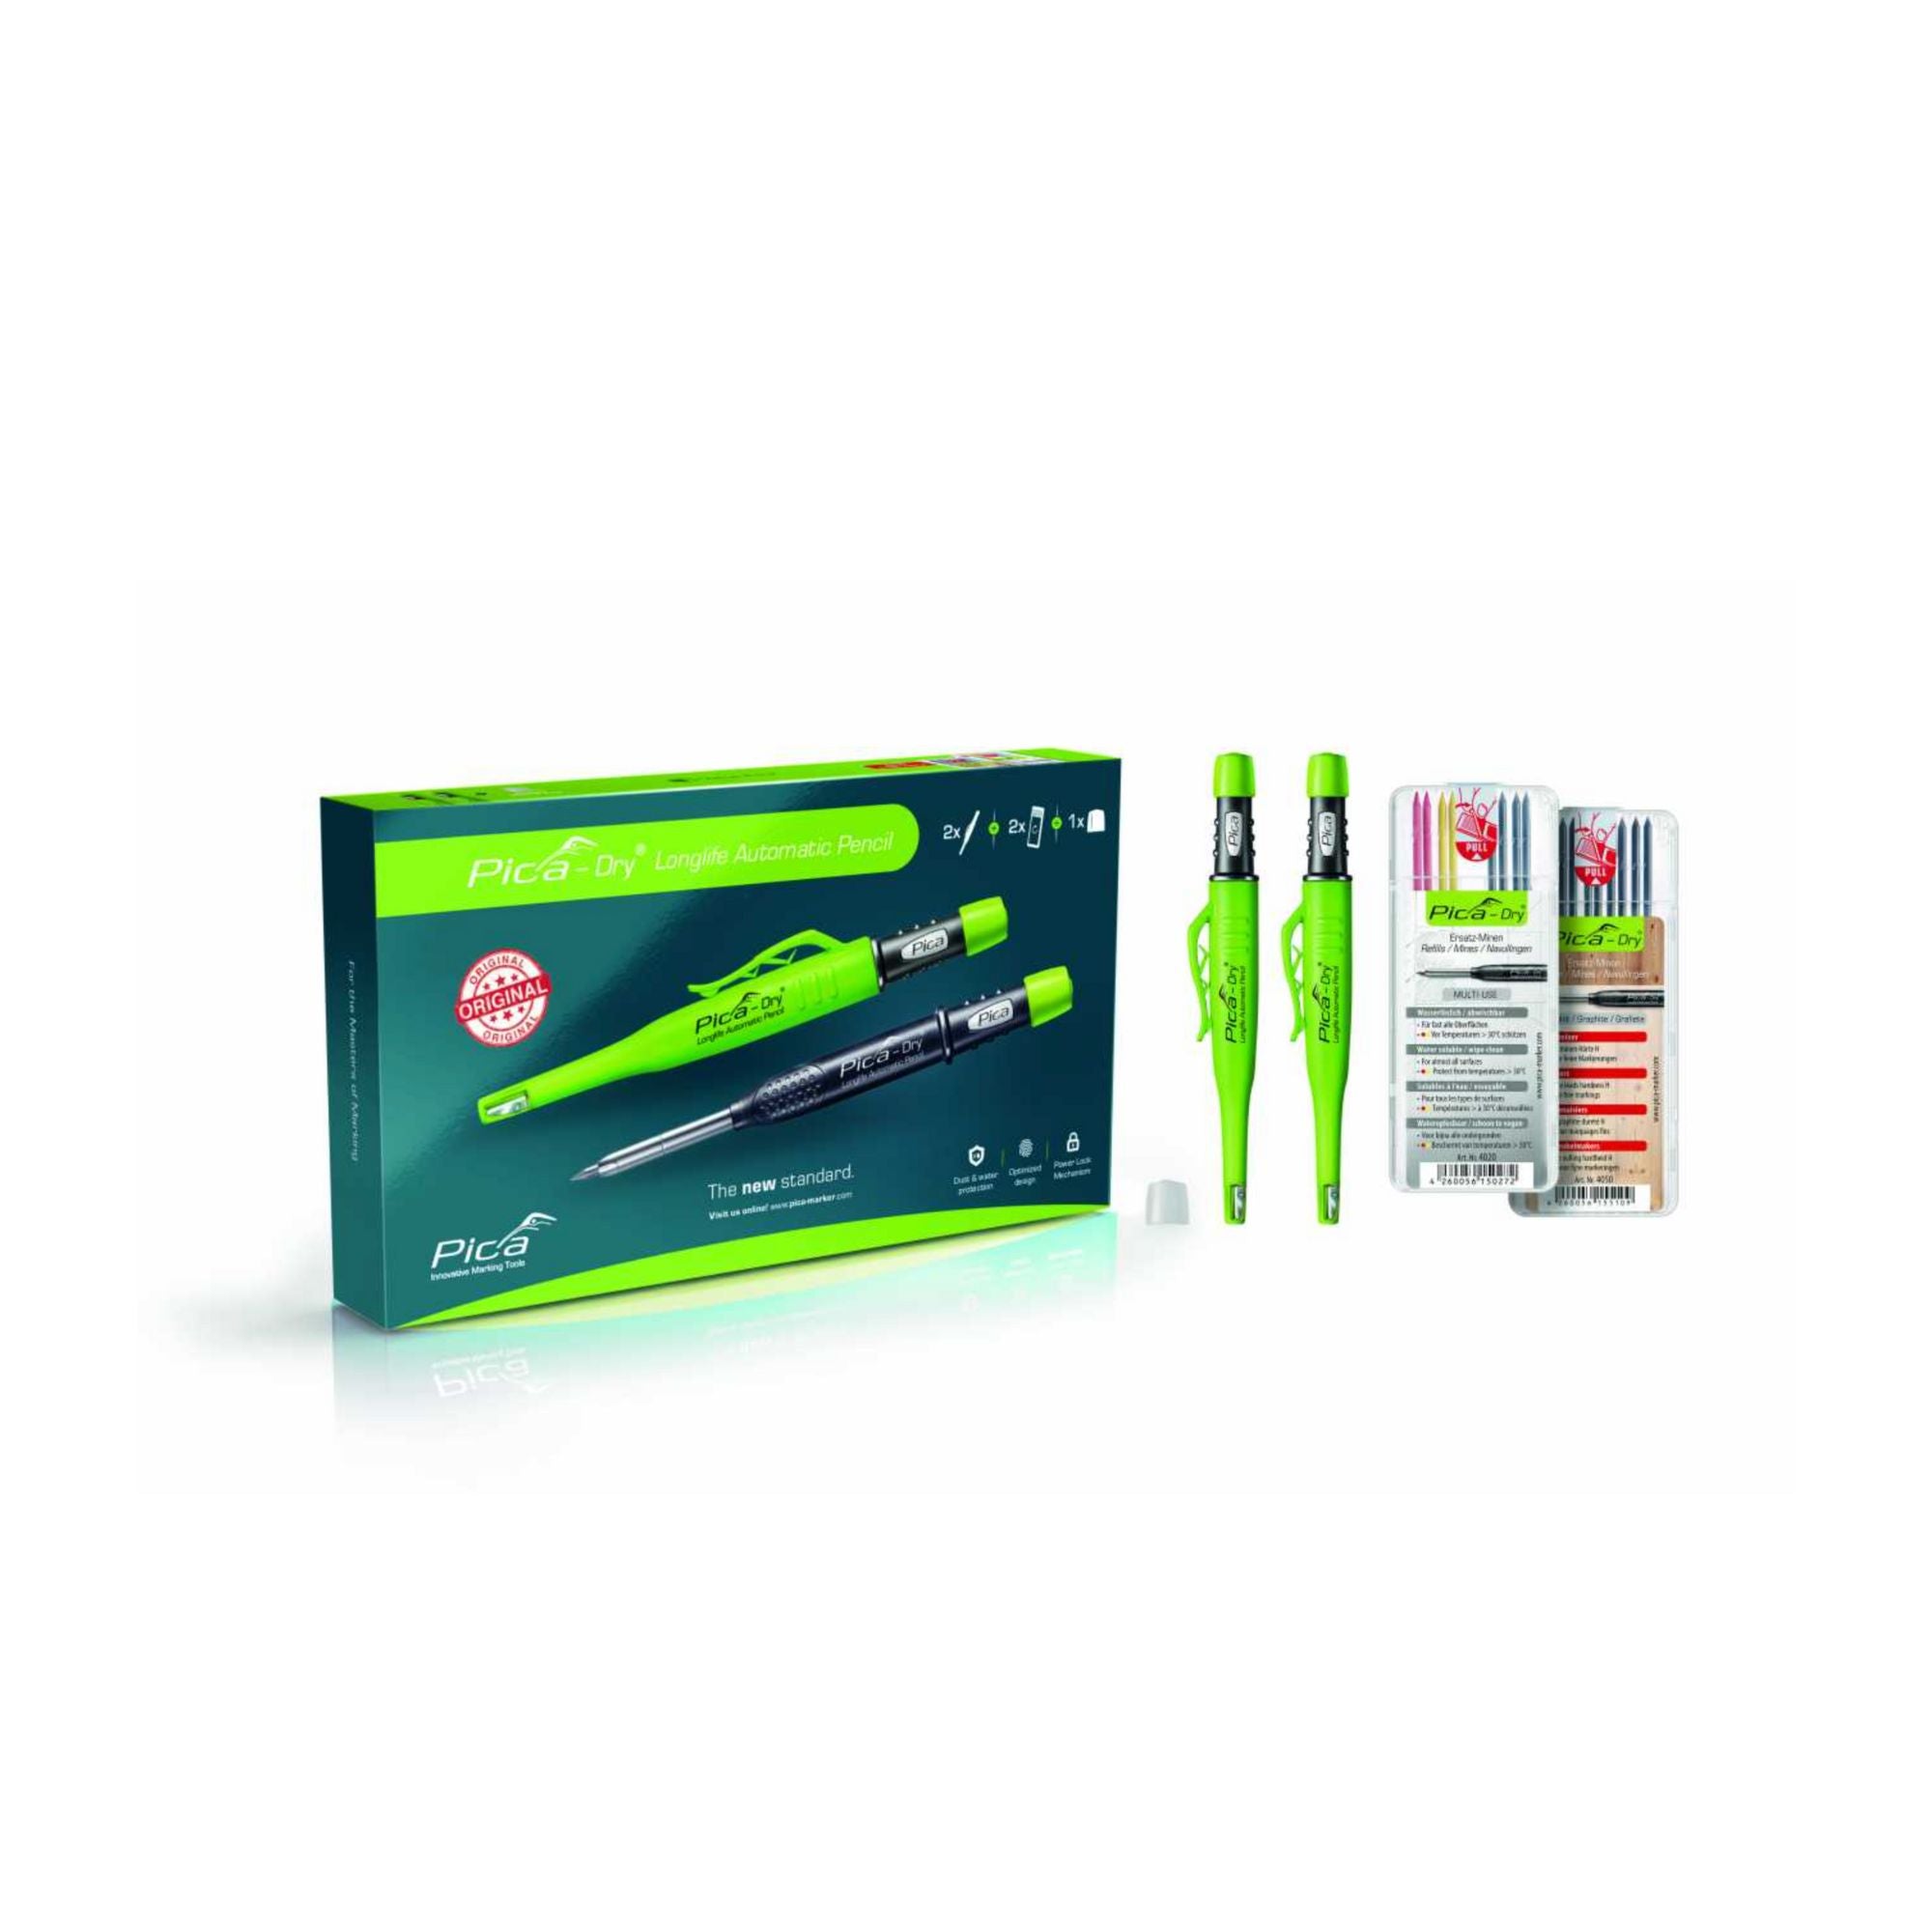 Pica Limited Edition 3097 Pencil Dry Value Pack + Refill Sets (2+2) +